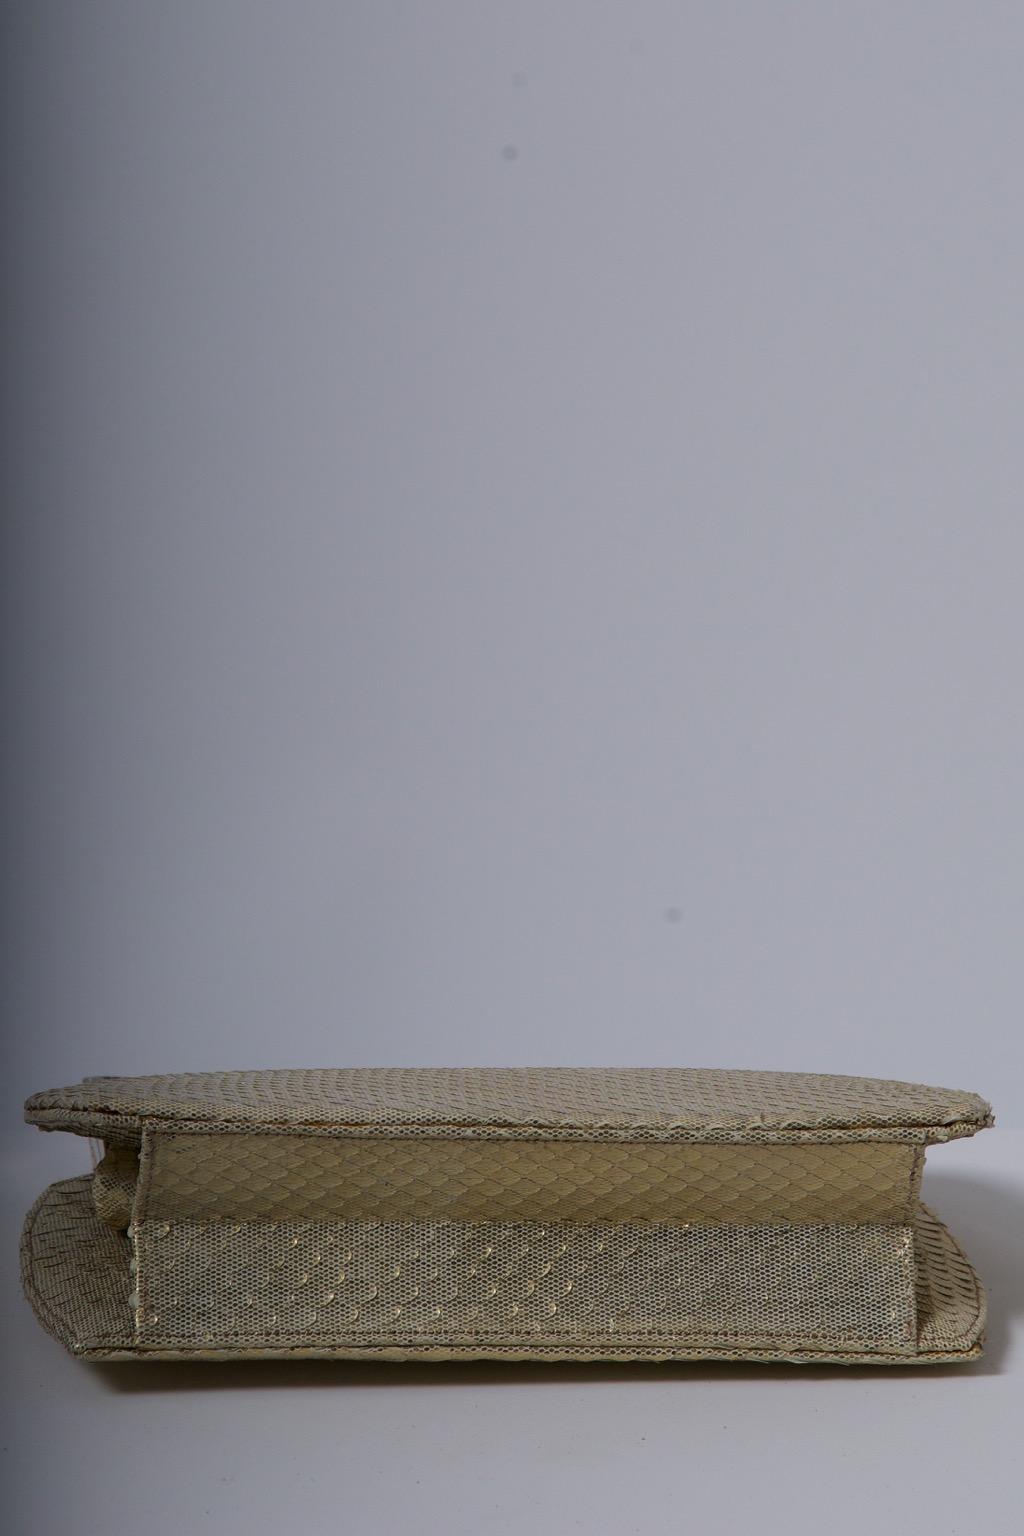 La Jeunesse Gold Snakeskin/Mesh Evening Bag In Good Condition For Sale In Alford, MA